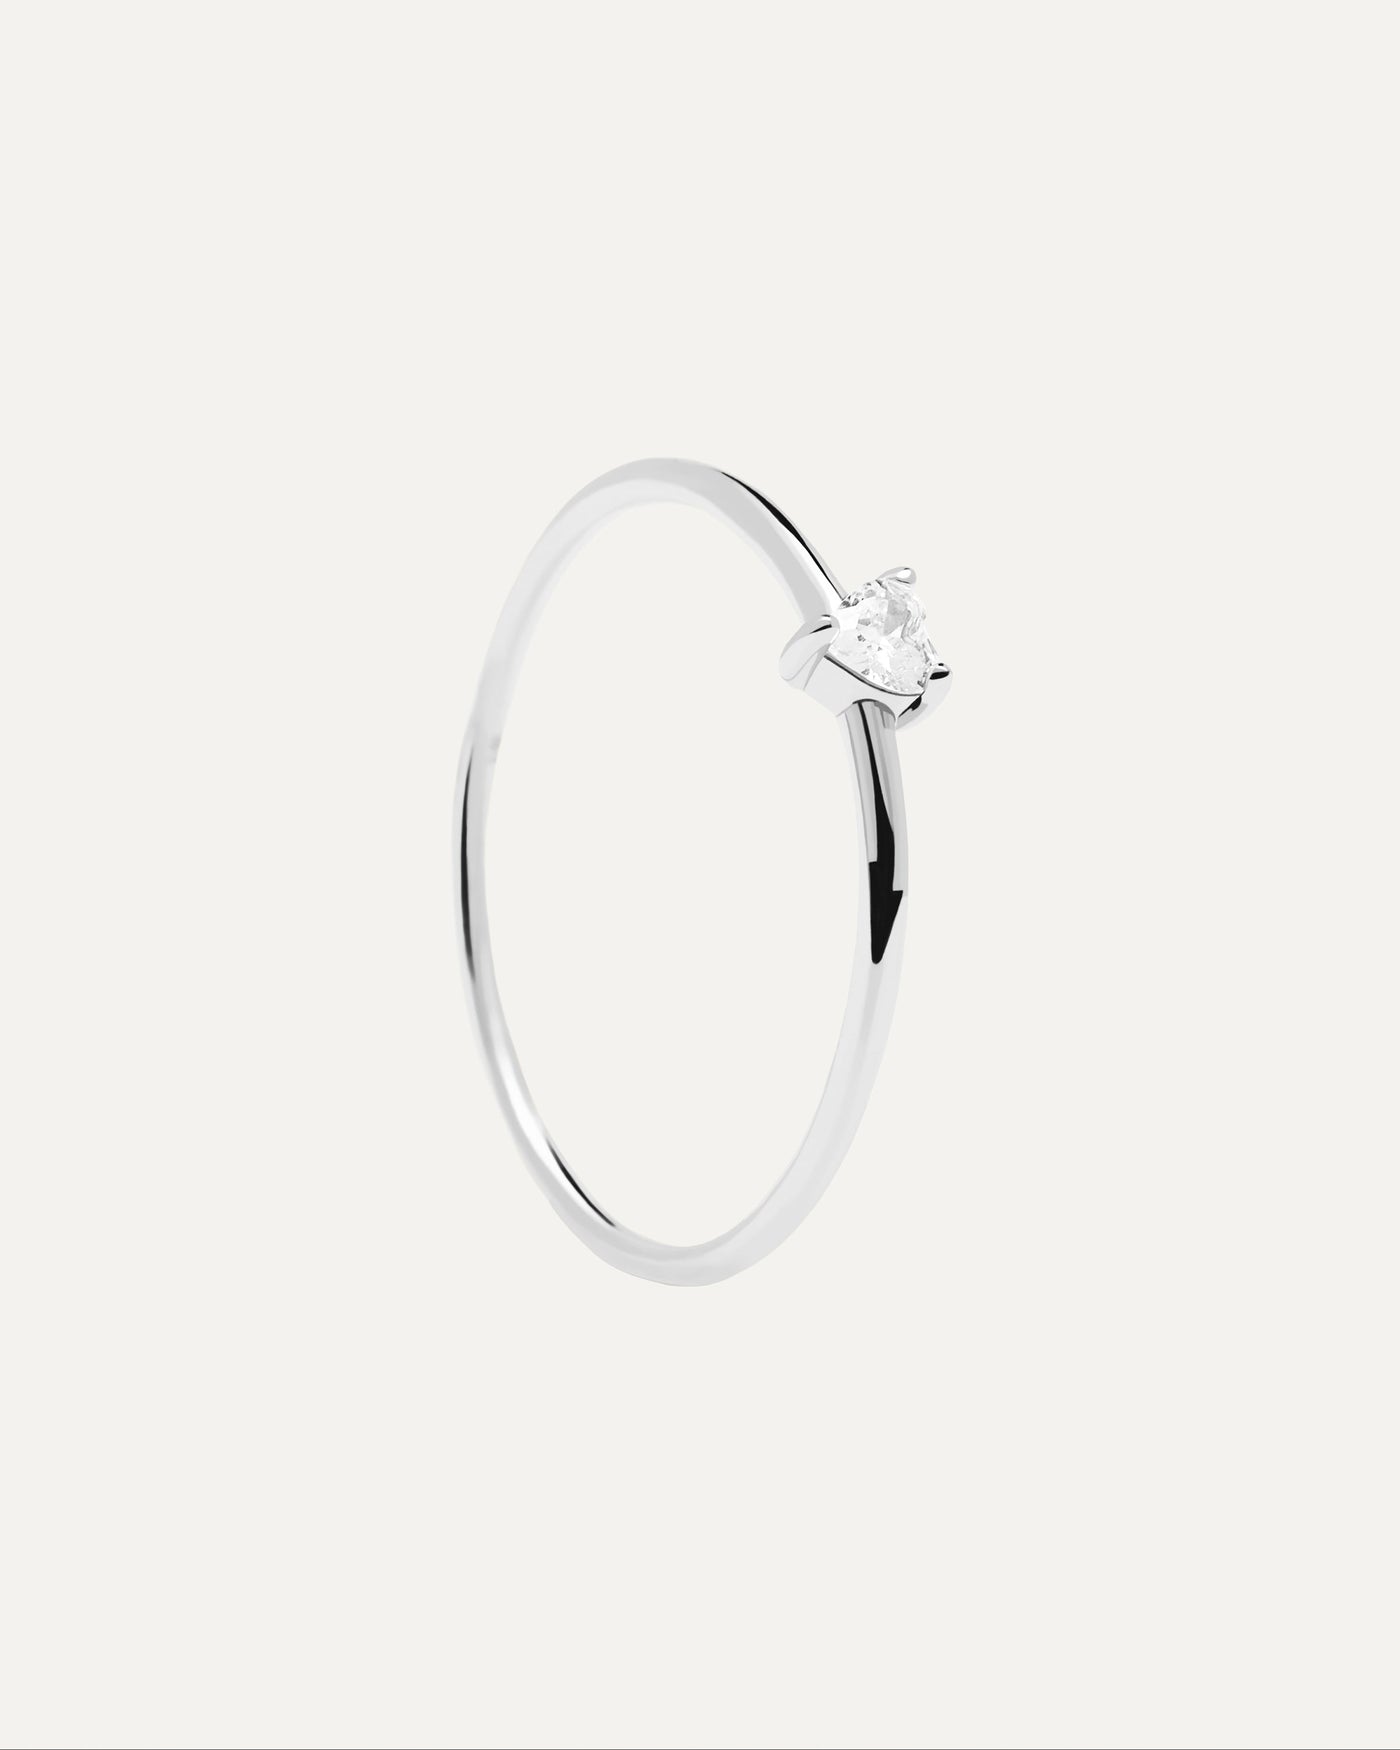 2023 Selection | White Heart Ring Silver. Cute 925 sterling silver ring with a heart-shaped white zirconia. Get the latest arrival from PDPAOLA. Place your order safely and get this Best Seller. Free Shipping.